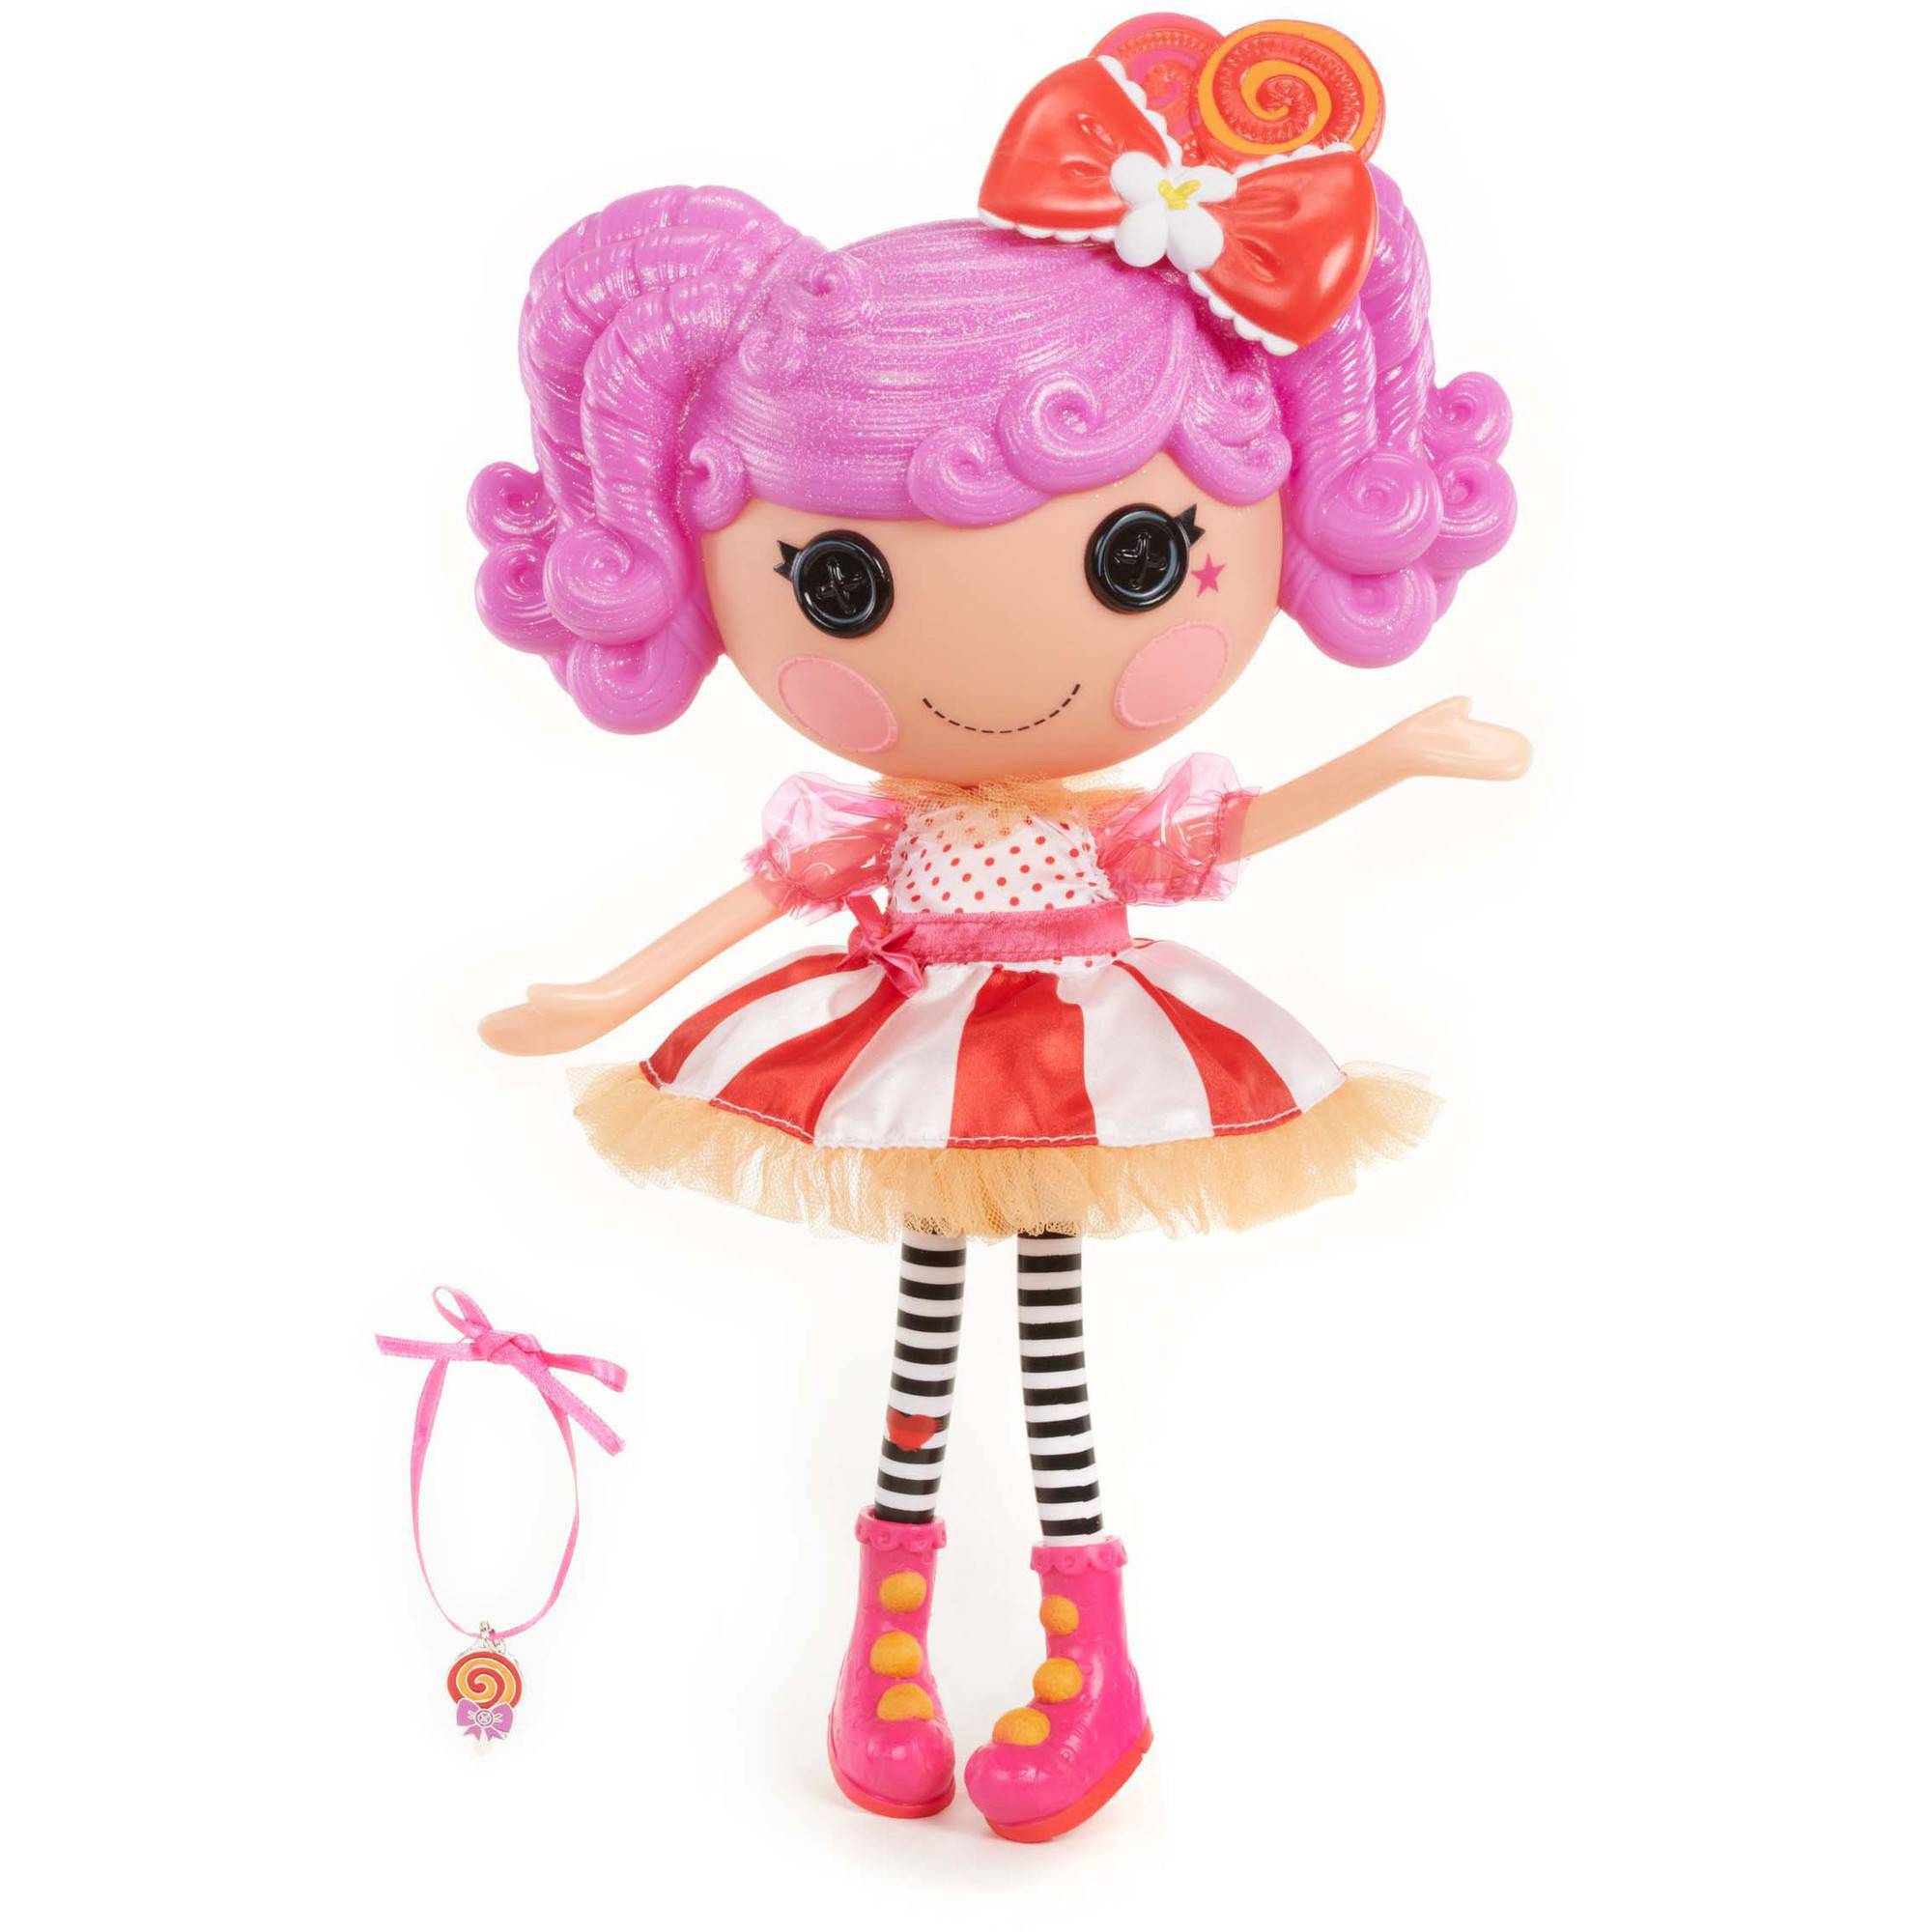 Lalaloopsy Super Silly Party Doll, Peanut Big Top - image 1 of 4